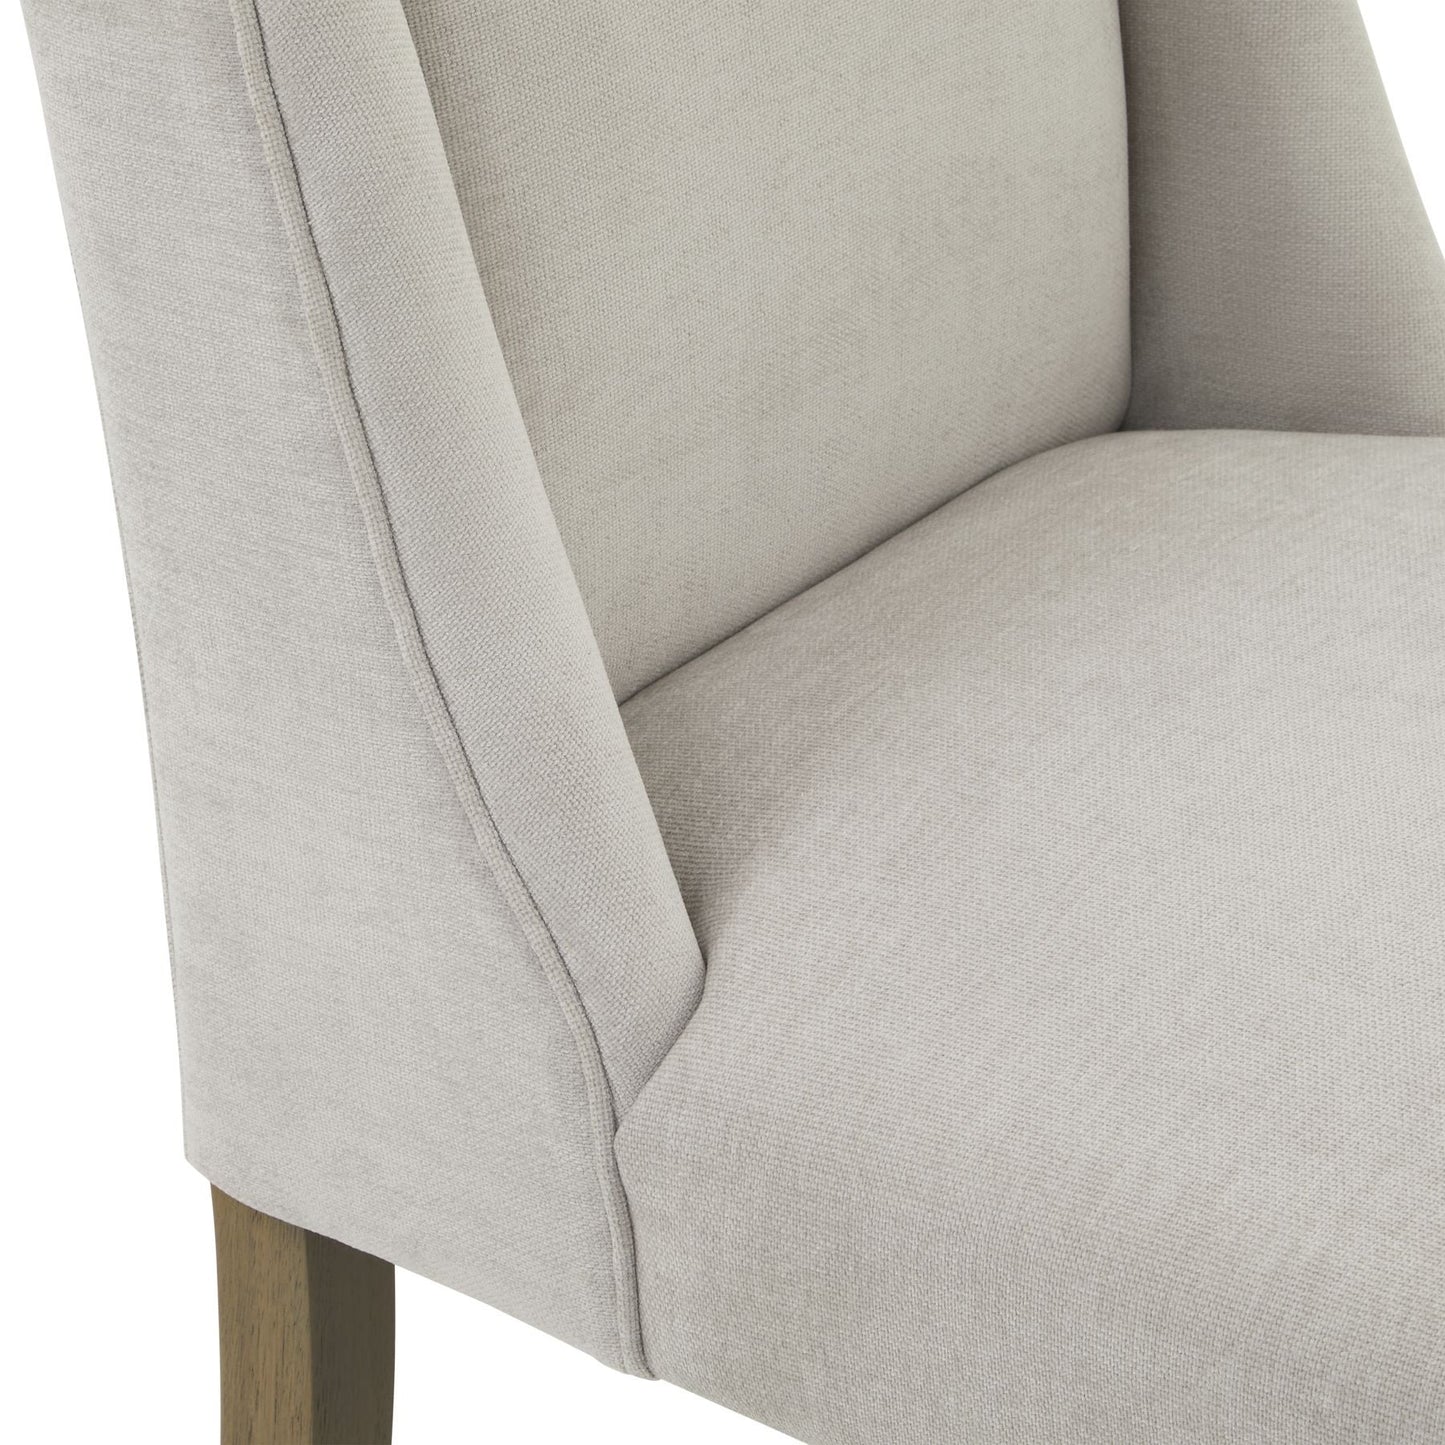 Modern Pale Grey Fabric Dining Chair